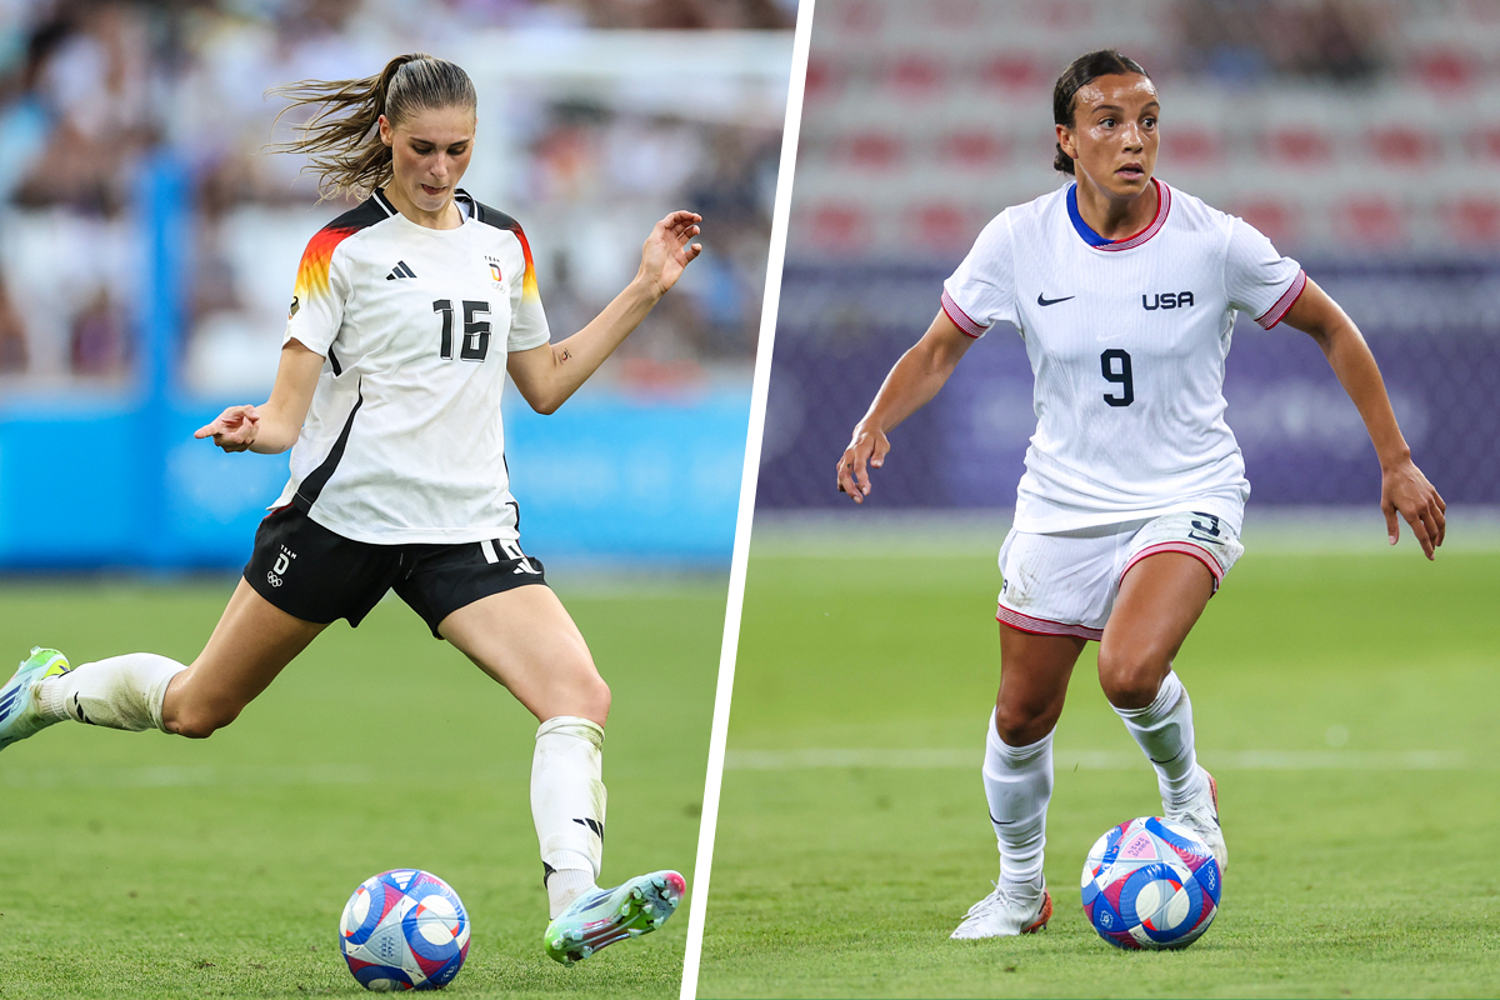 U.S. women's soccer team faces off against Germany as both teams hunger for redemption